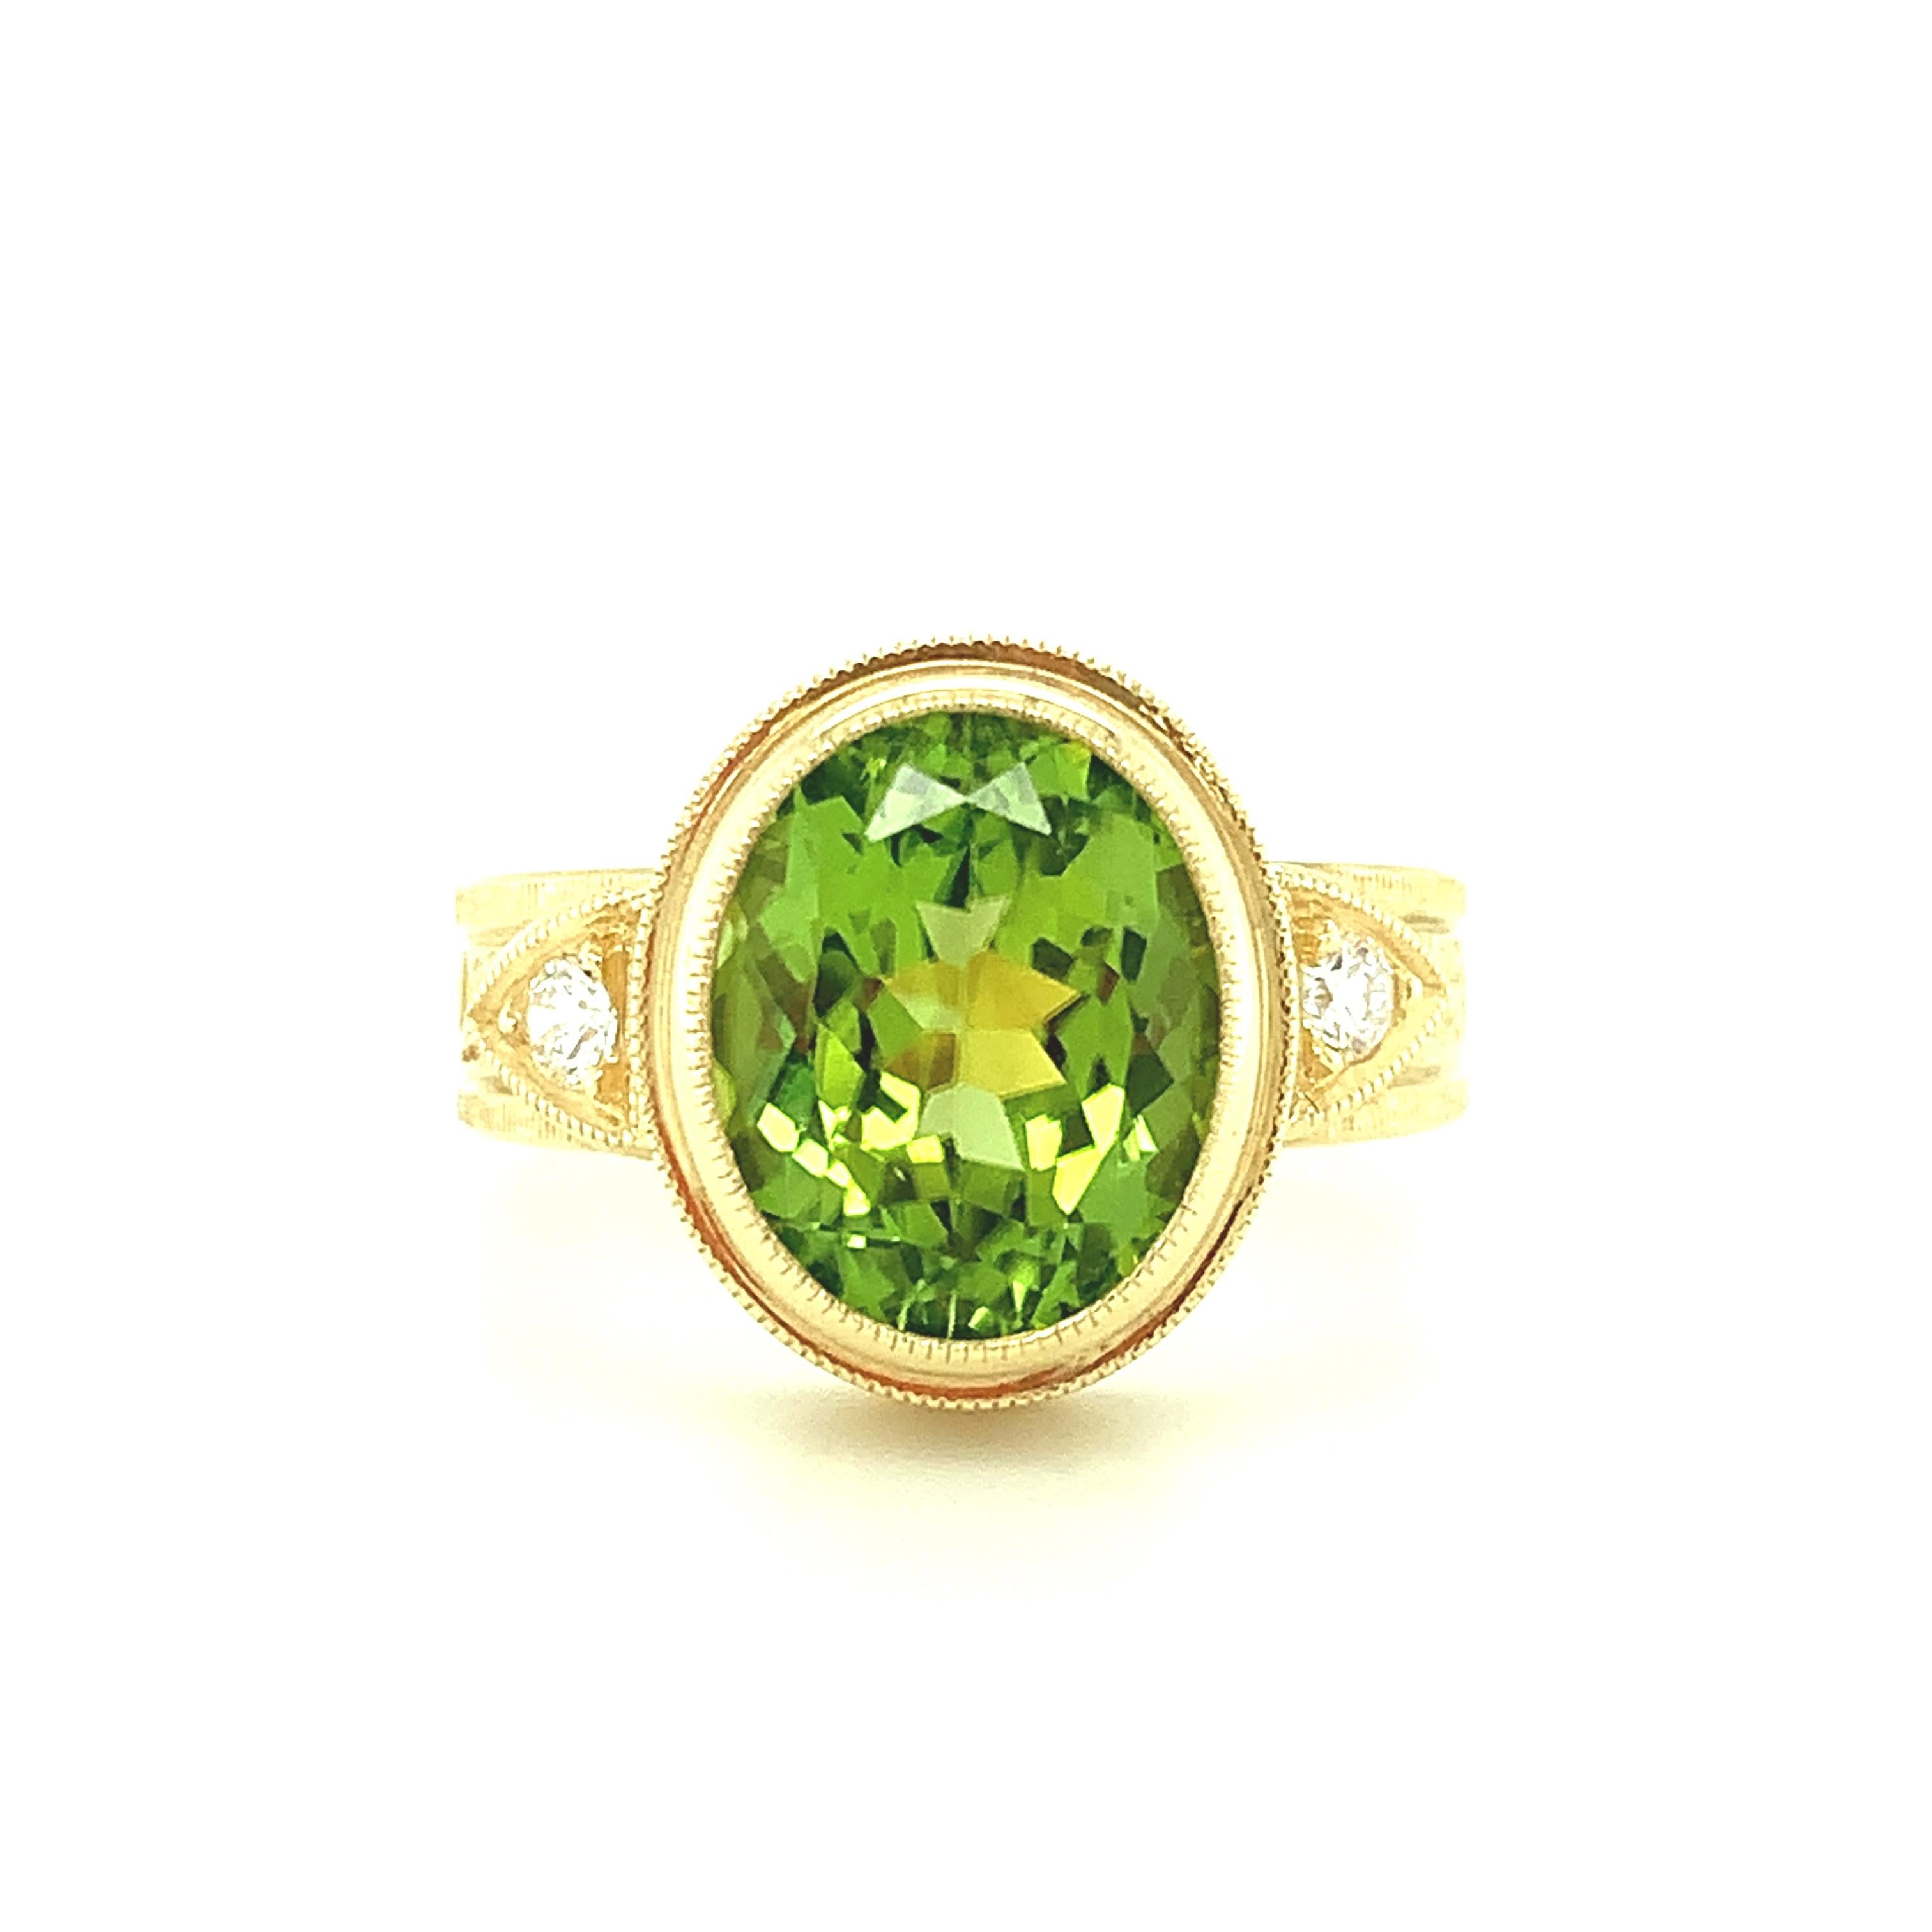 This handmade 18k yellow gold ring features a bright, crystalline peridot with beautiful color and exceptional brilliance. Our signature ring was designed to showcase a single gorgeous gem by setting it in an intricately engraved, multi-dimensional